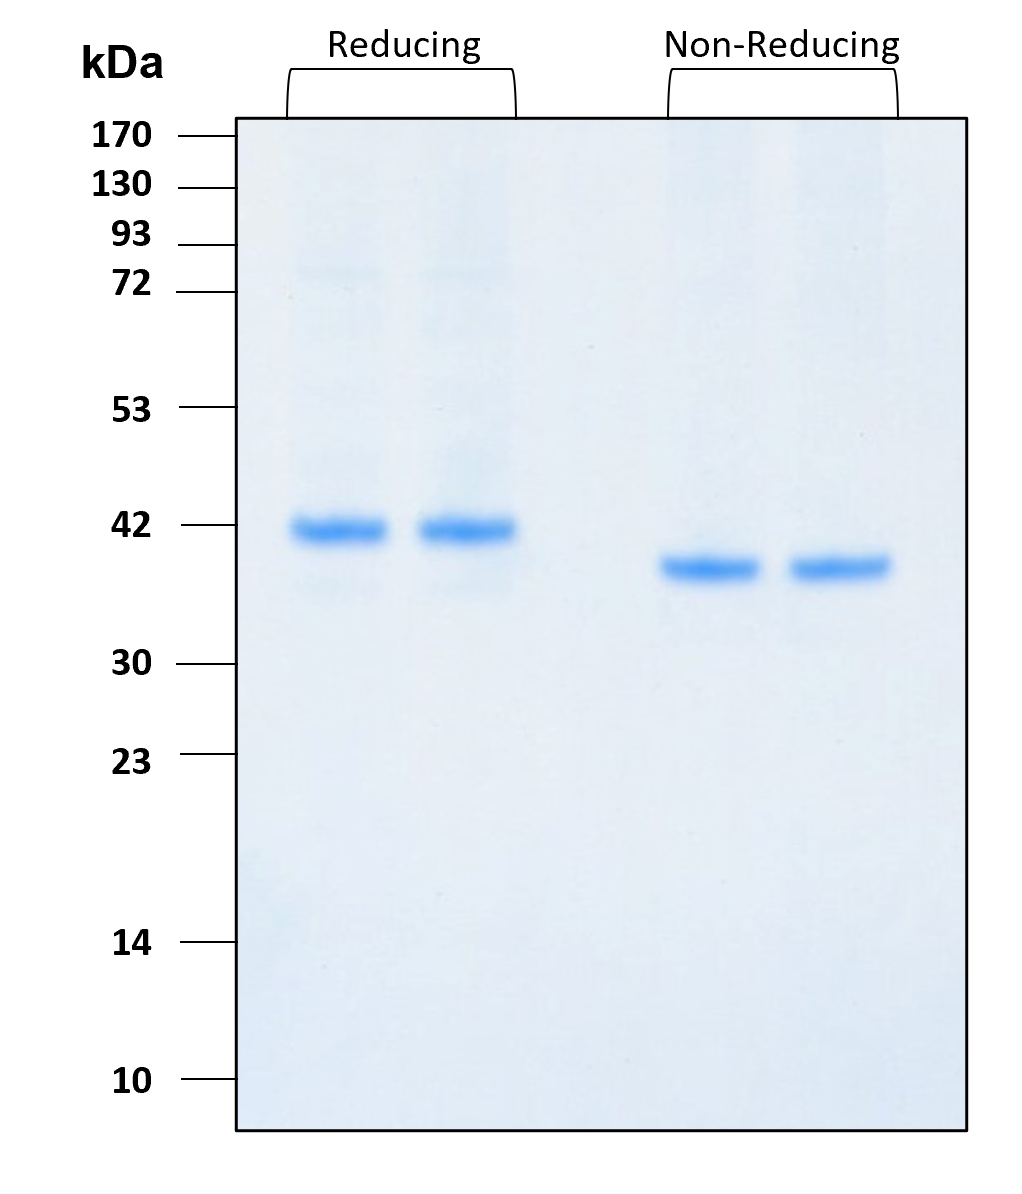 Purity of recombinant human Lefty-1 was determined by SDS- polyacrylamide gel electrophoresis. The protein was resolved in an SDS- polyacrylamide gel in reducing and non-reducing conditions and stained using Coomassie blue.